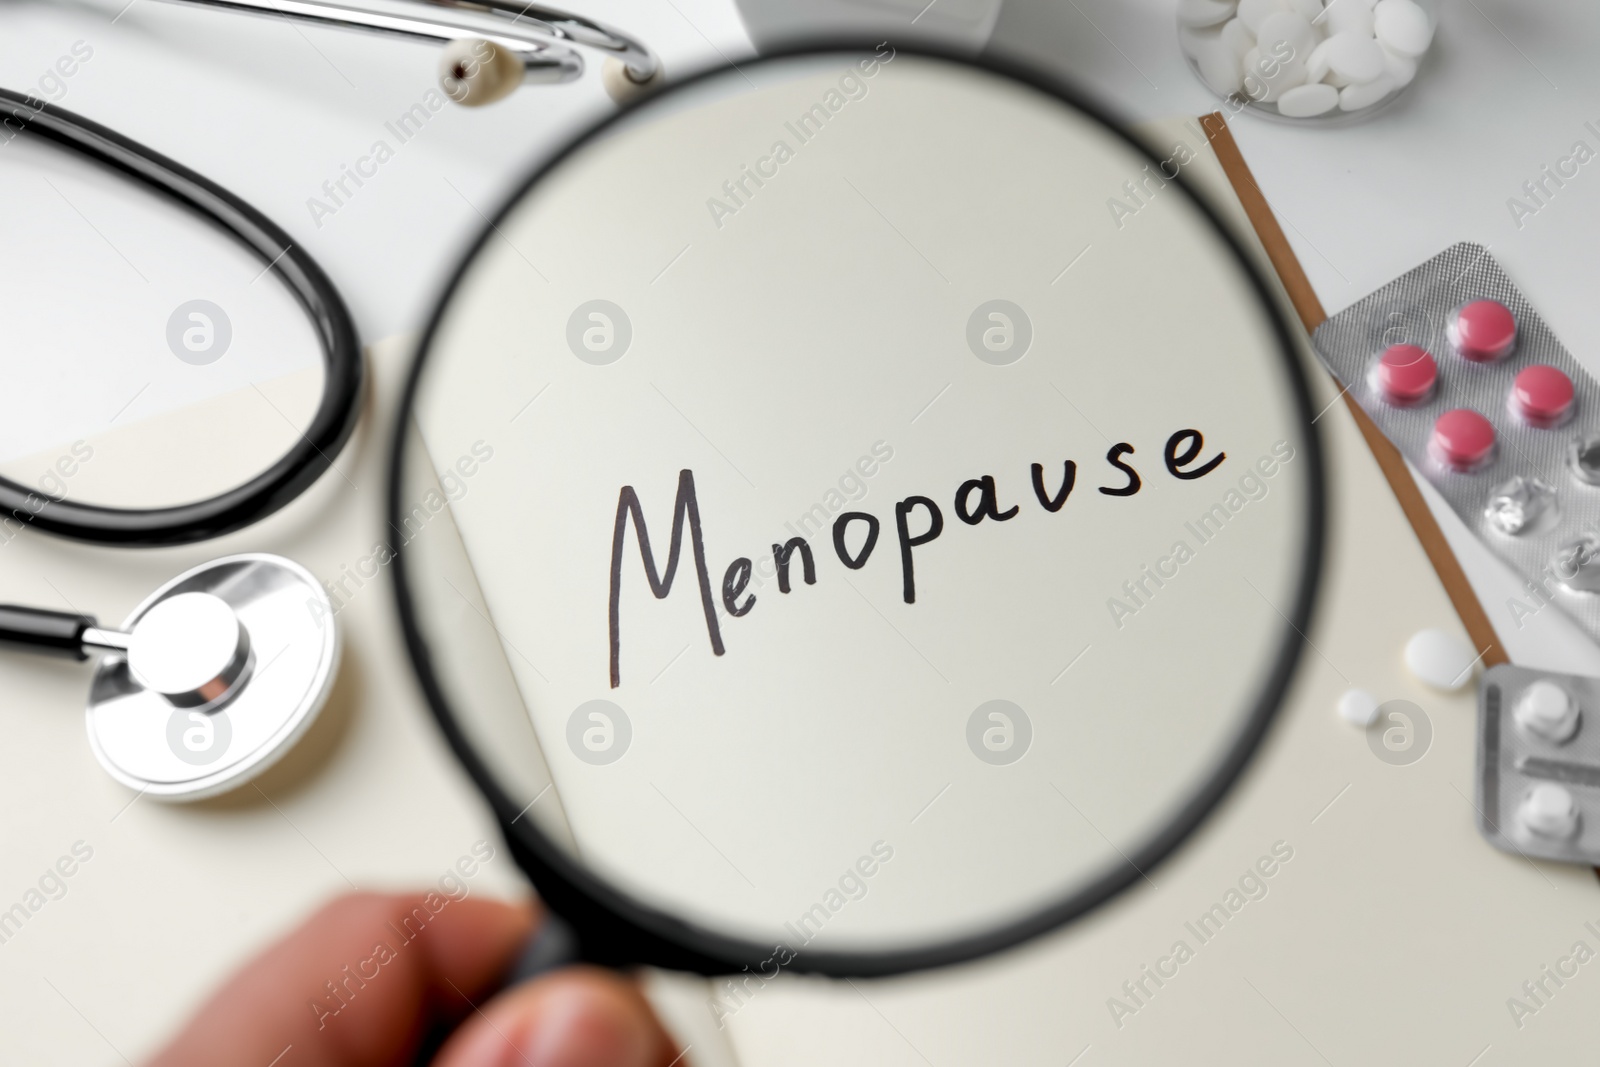 Photo of Woman holding magnifying glass over notebook with word Menopause, closeup